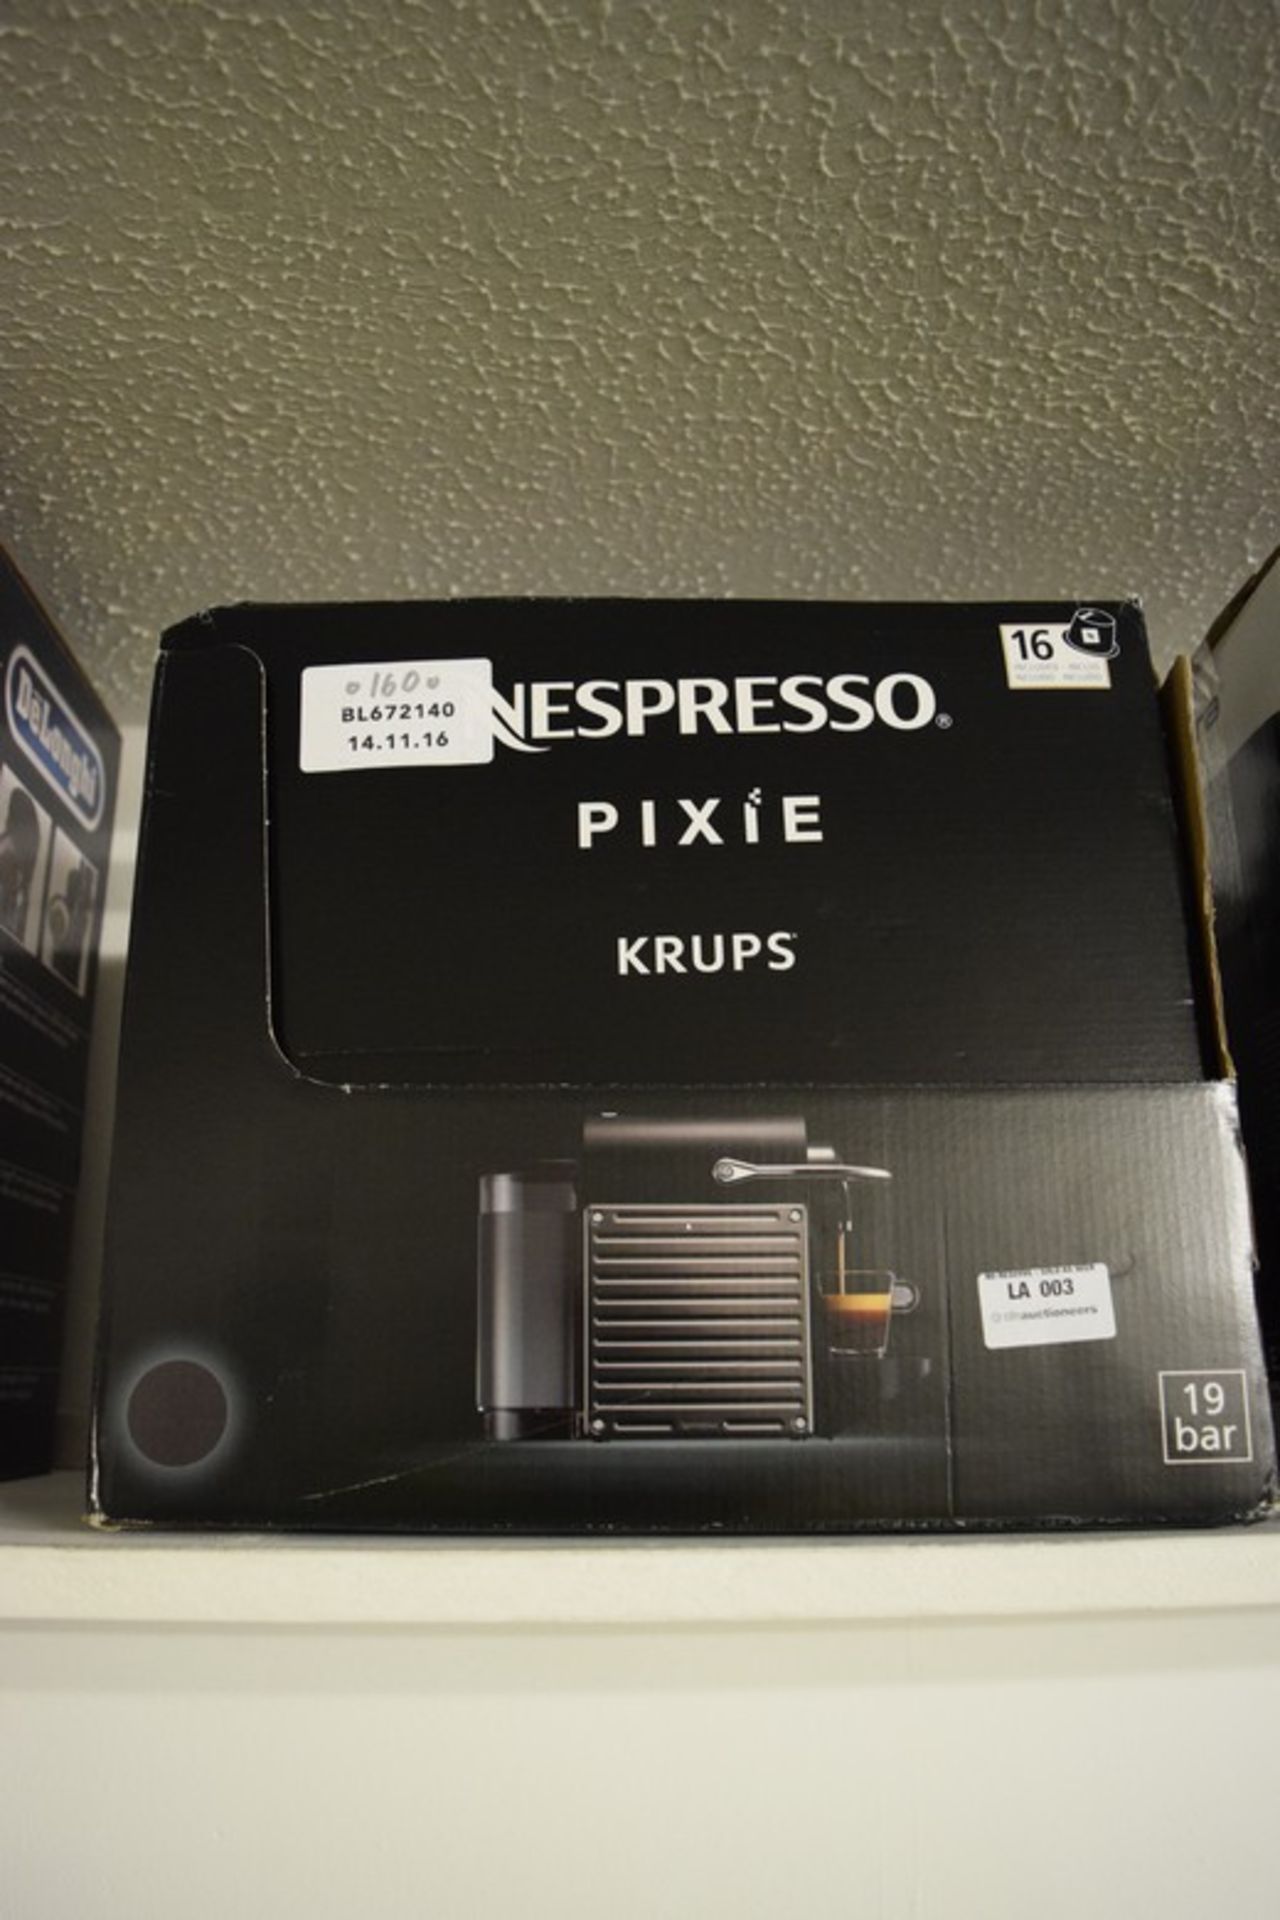 1 x BOXED KRUPS NESPRESSO PIXIE AUTOMATIC COFFEE MACHINE RRP £160 (14.11.2016) *PLEASE NOTE THAT THE